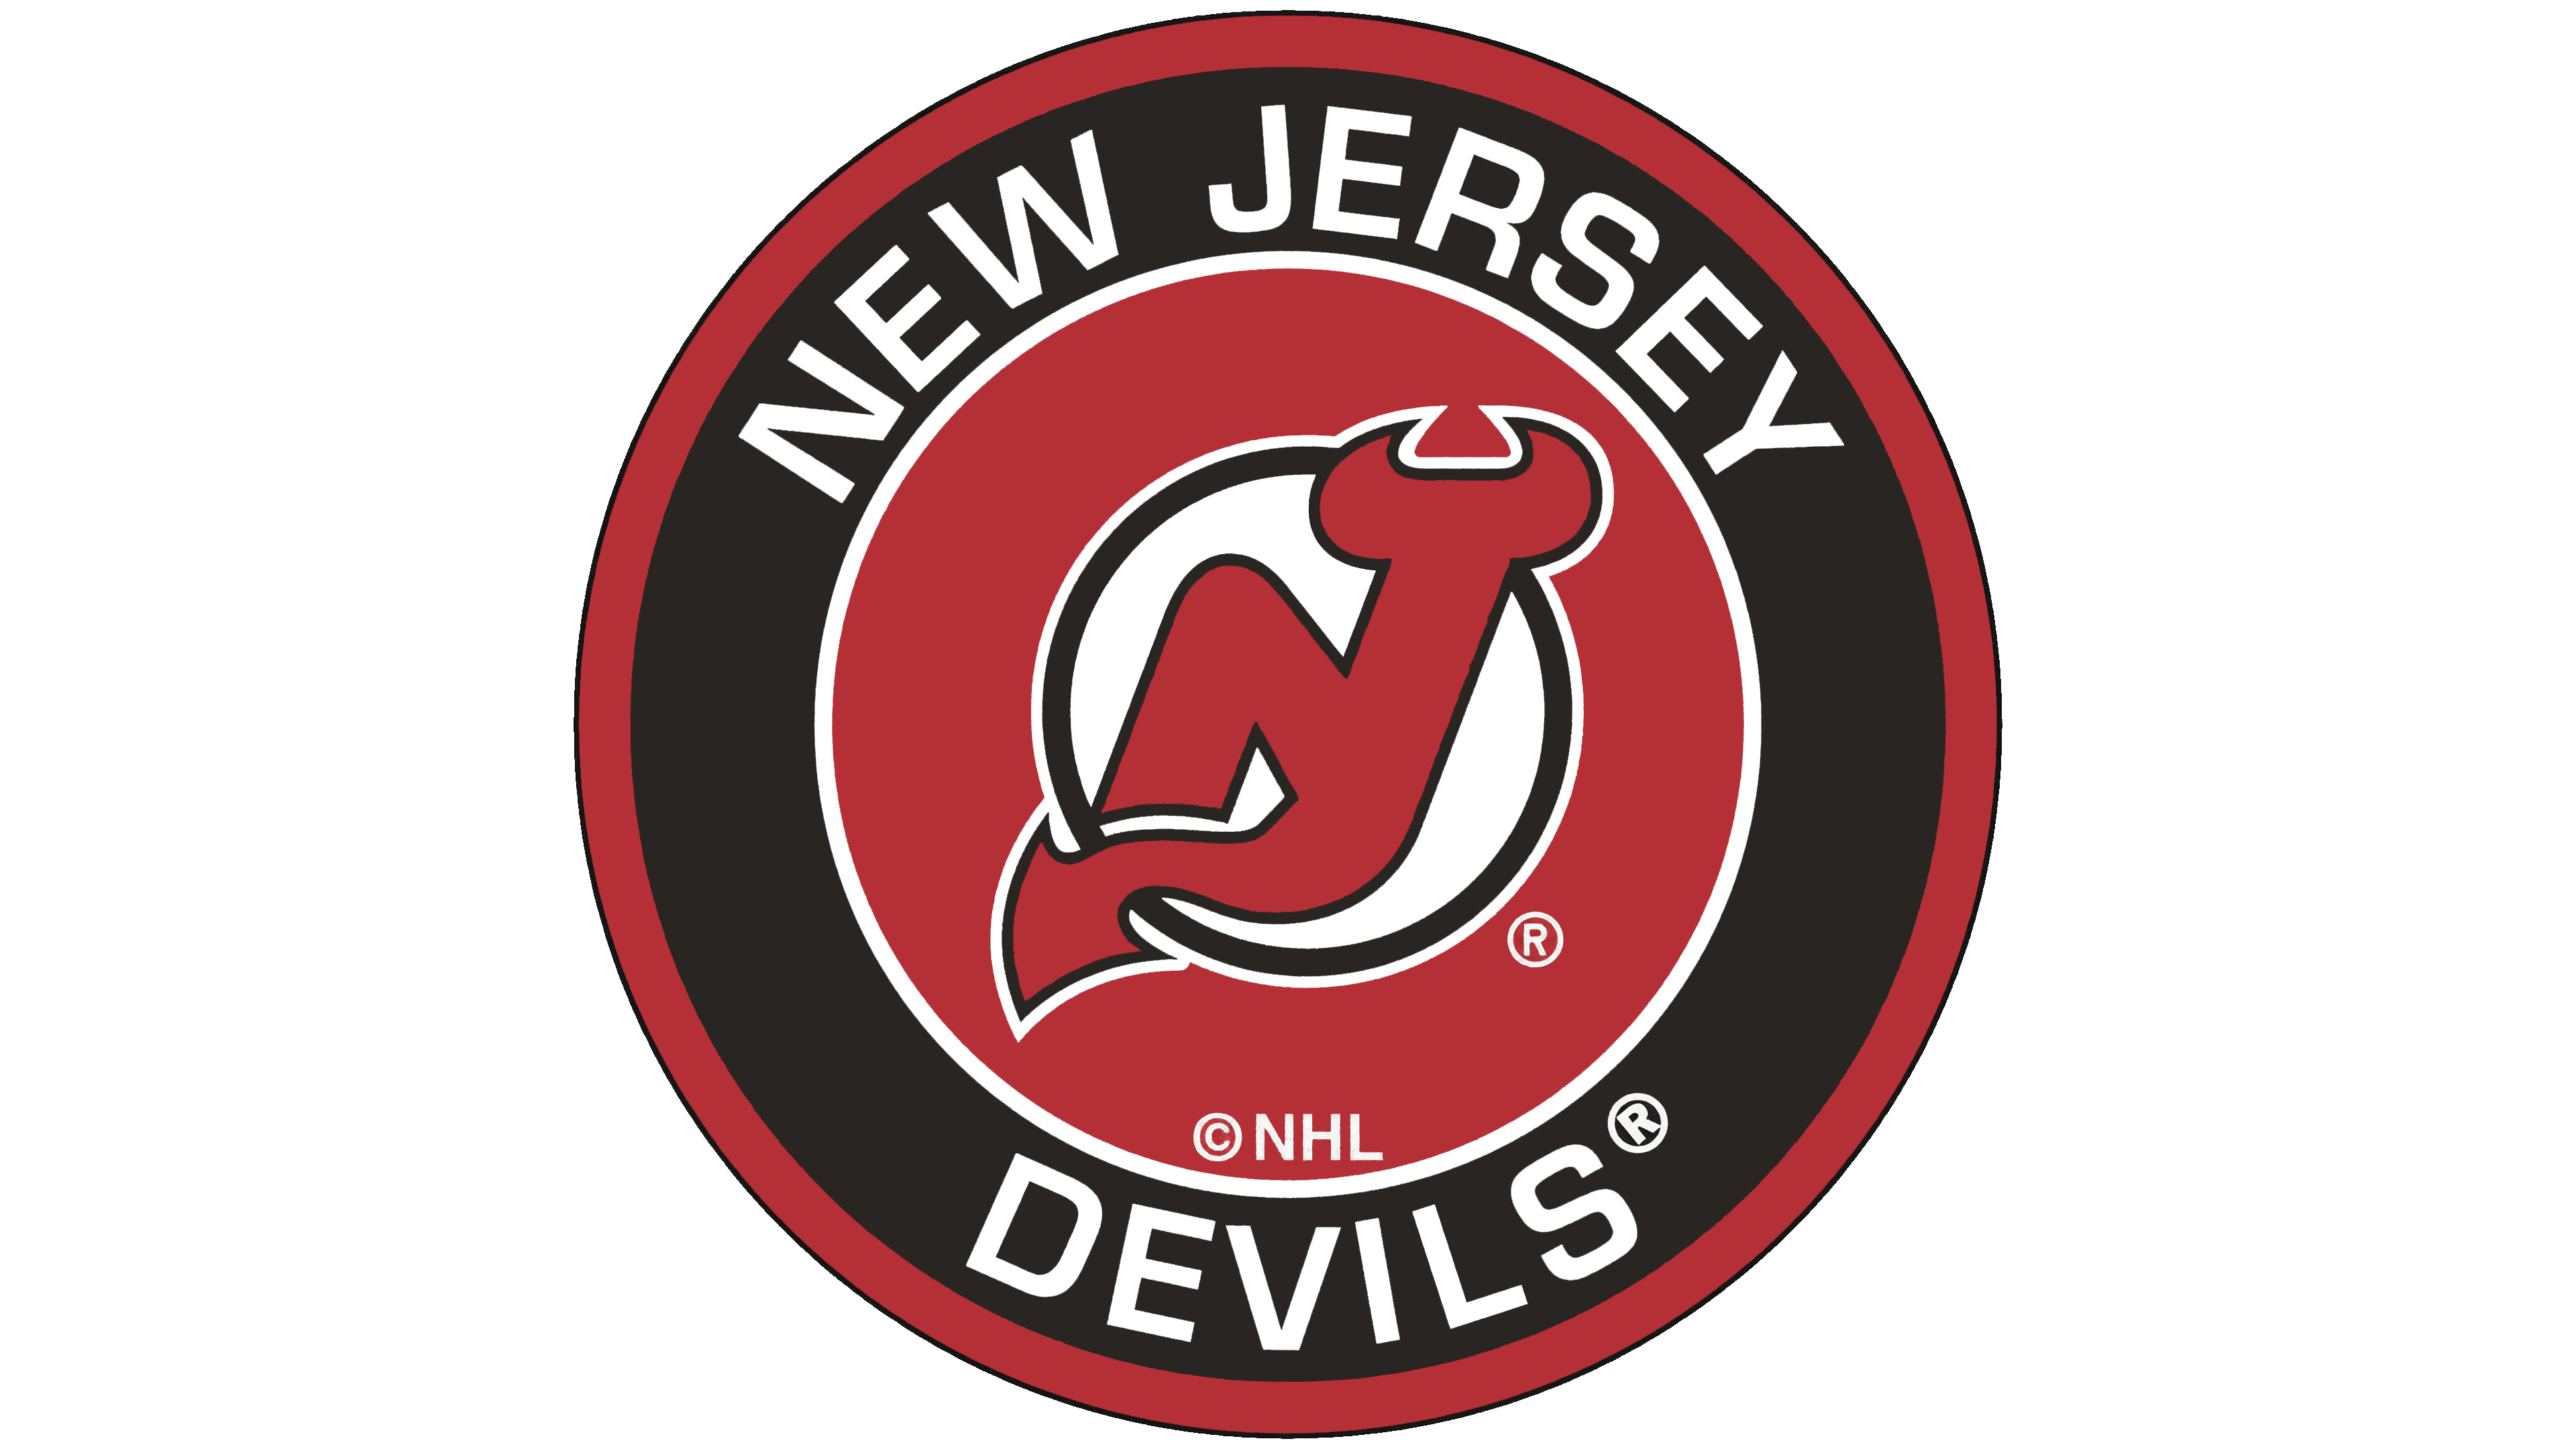 New Jersey Devils Logo, meaning, history, PNG, SVG, vector